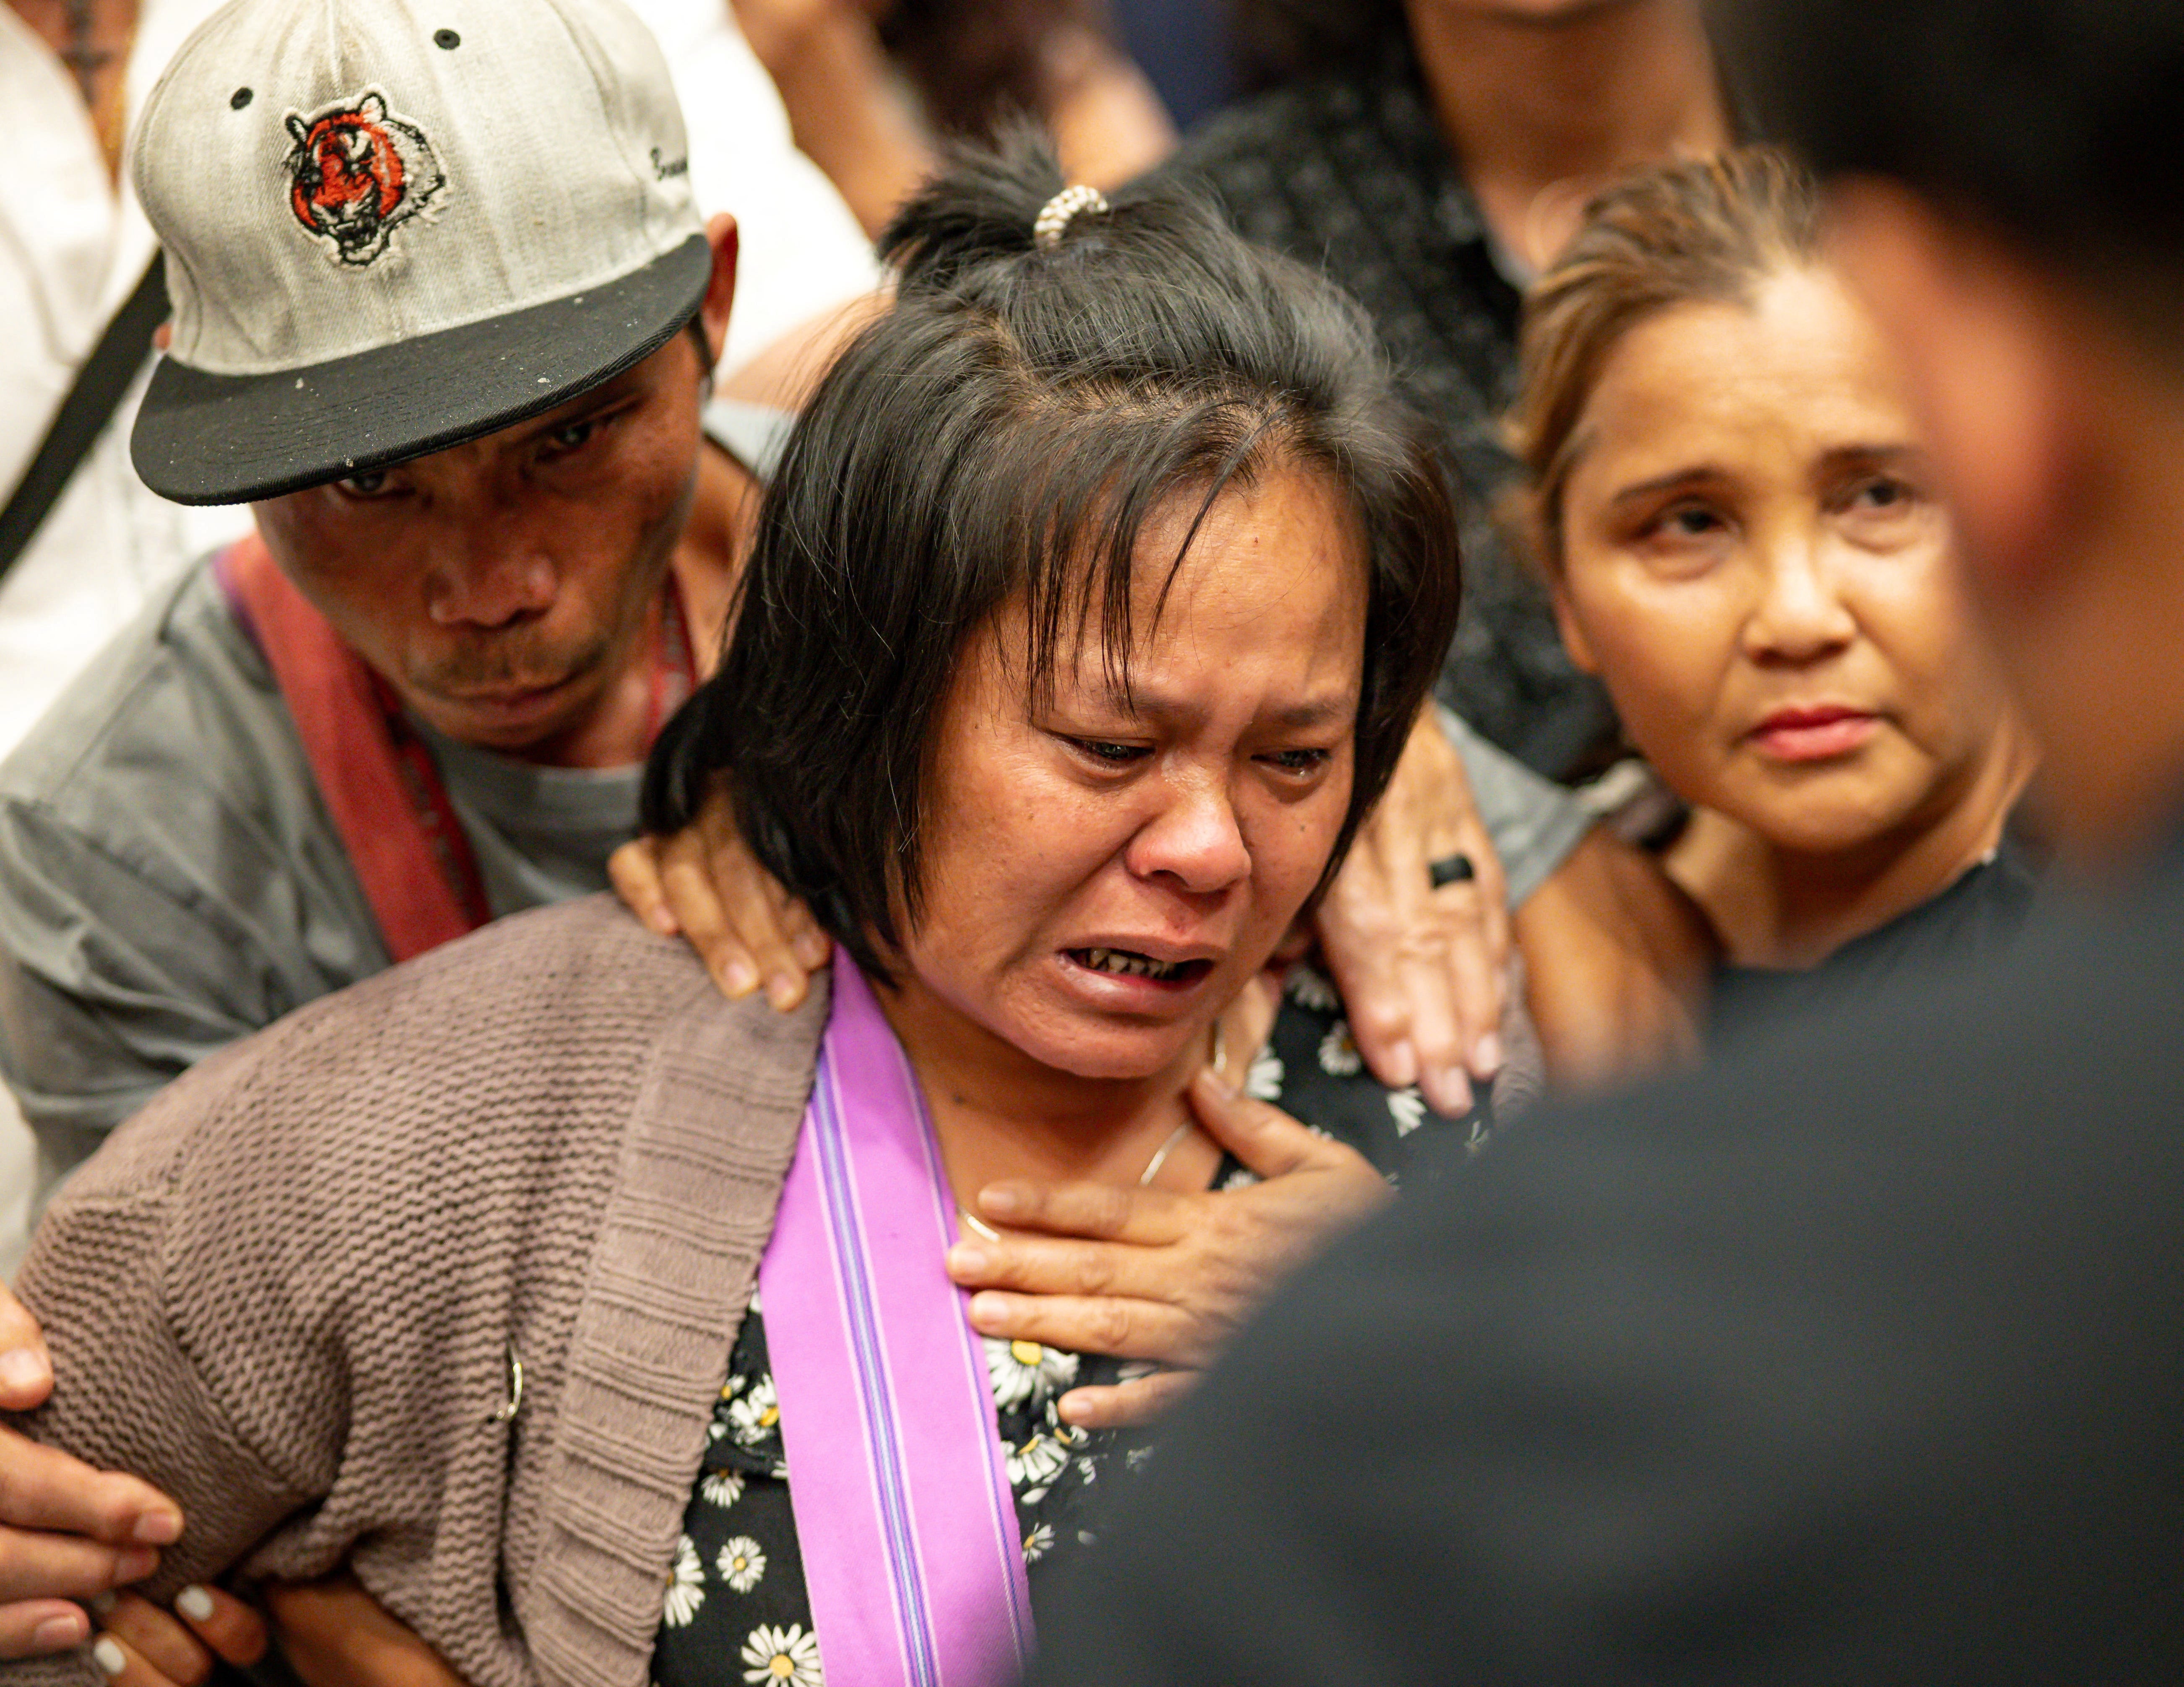 The mother of the 13 year old boy who was shot and killed by Utica Police cries after listening to a translator inside City Hall in Utica, New York, U.S. June 29, 2024.